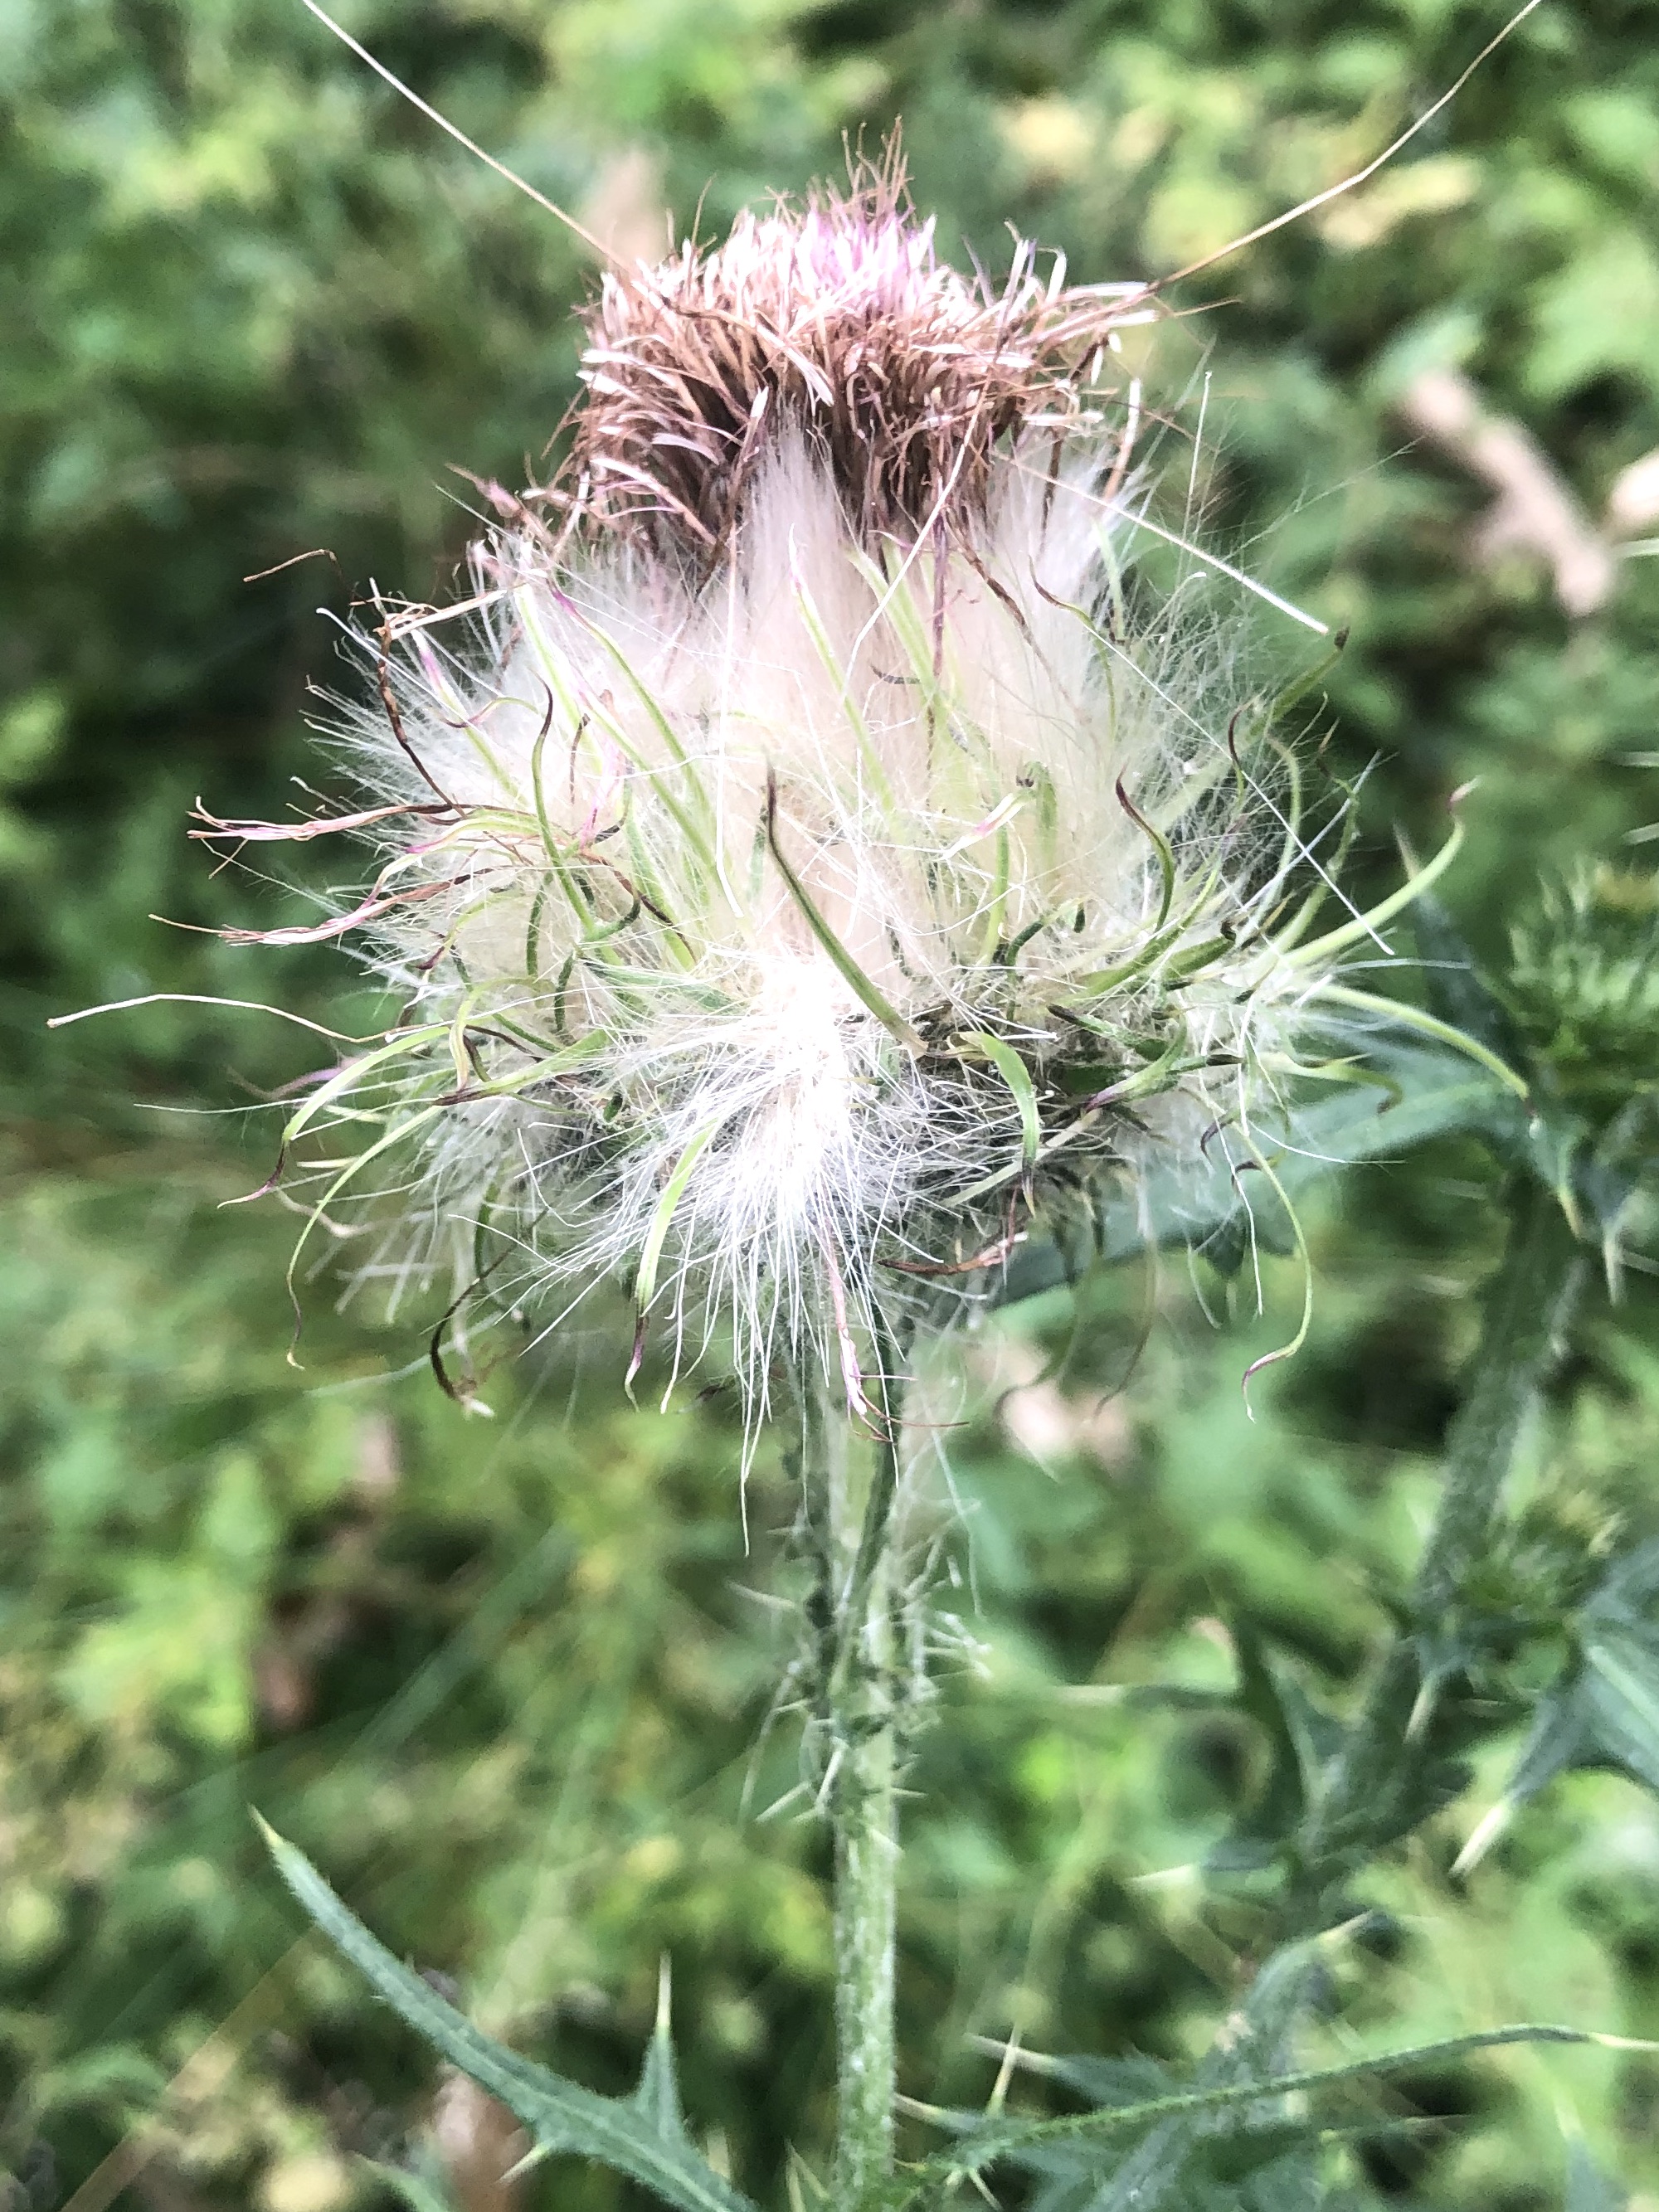 Bull Thistle seed fluff in Wingra Park in Madison, Wisconsin on August 13, 2022.